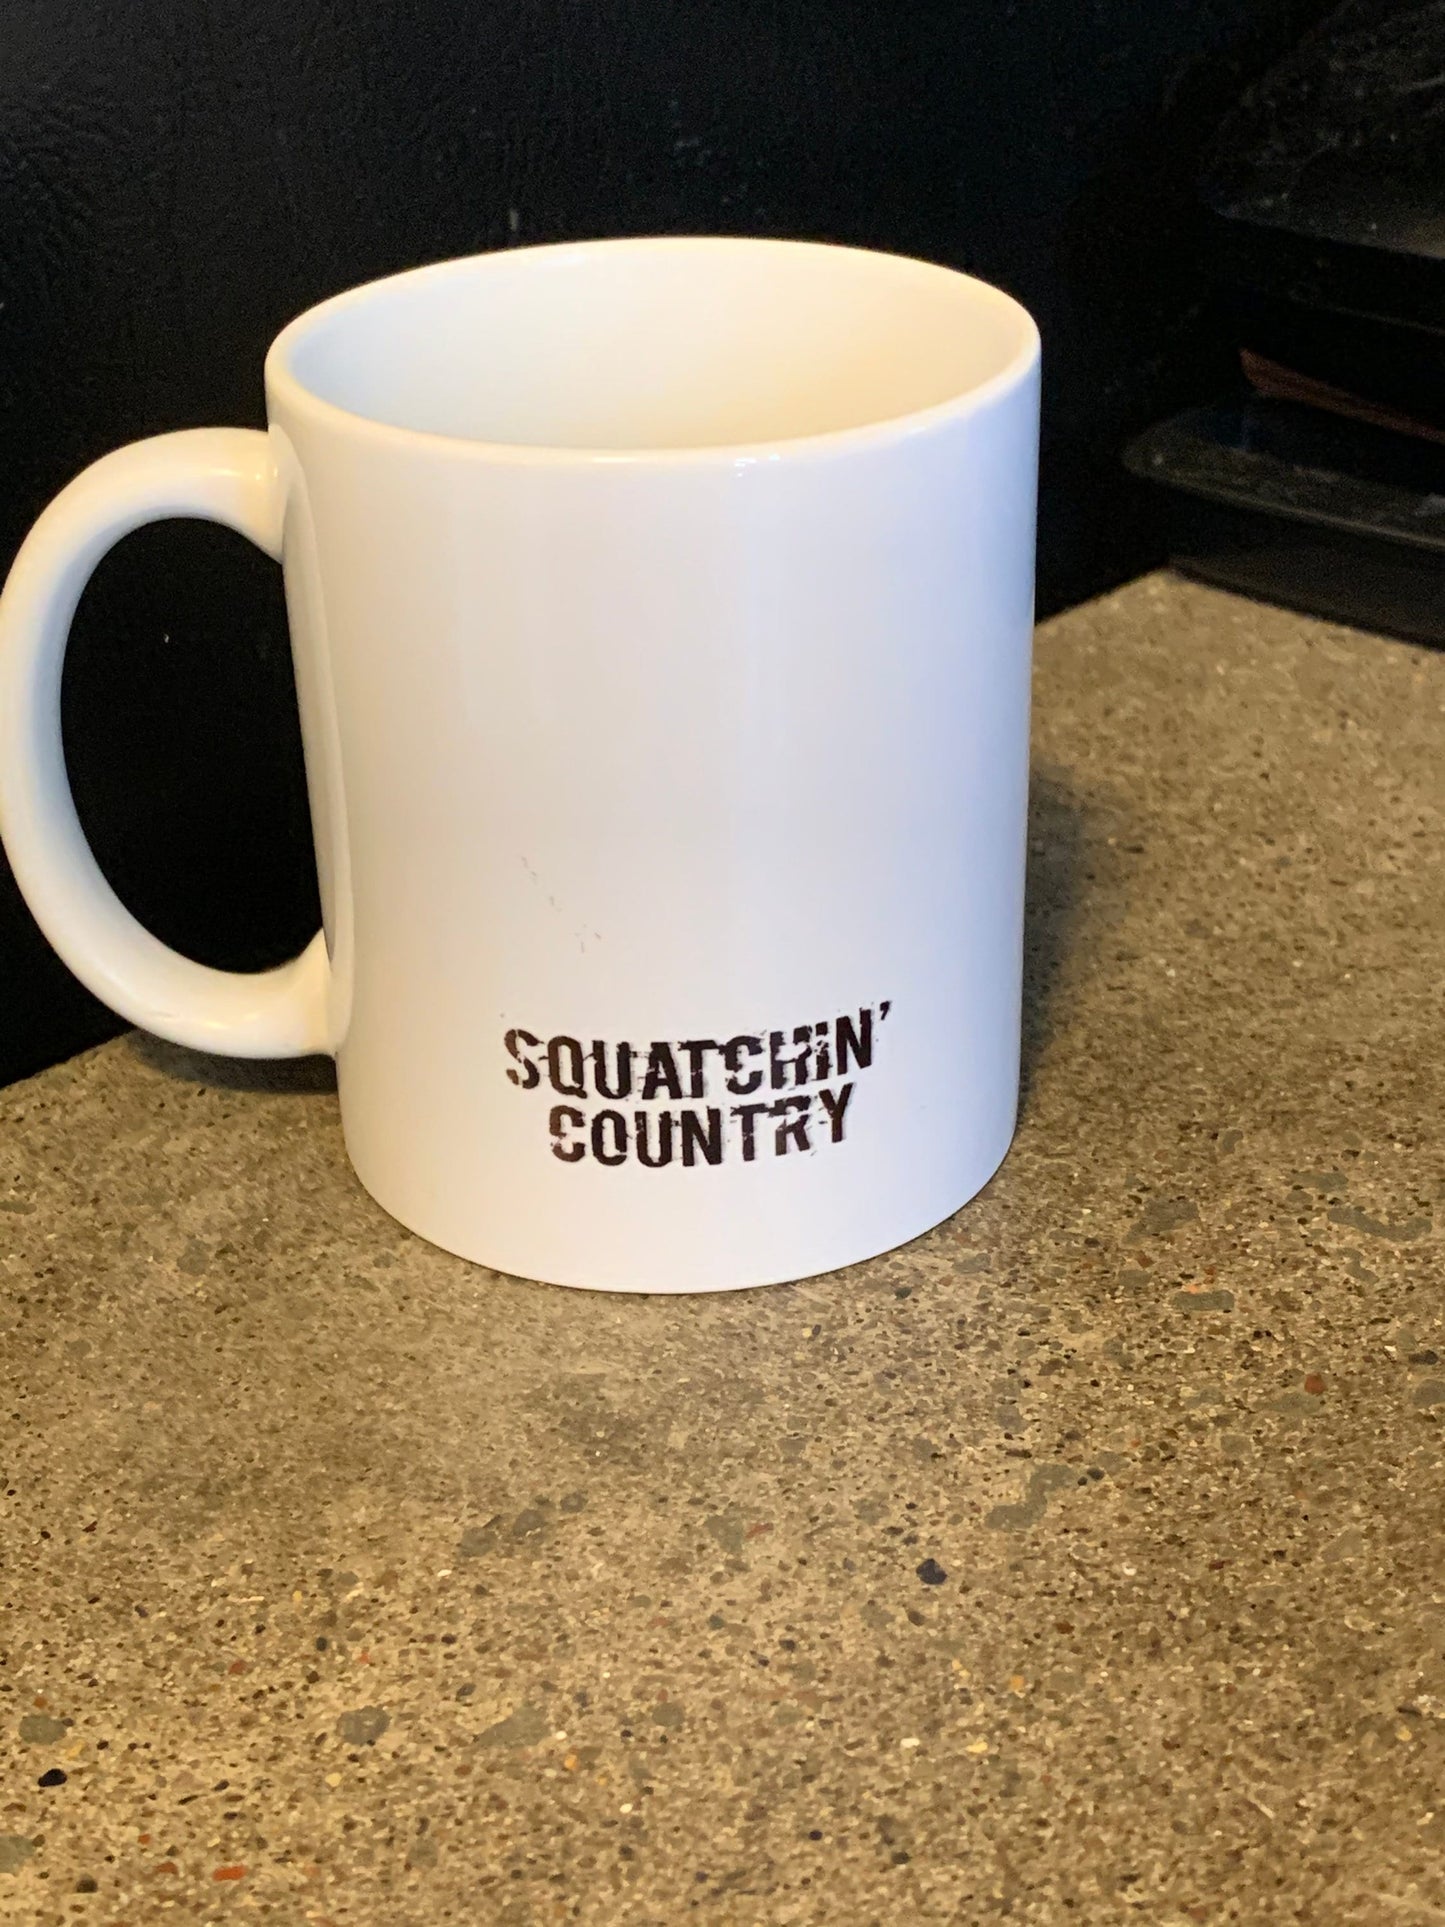 How about coffee mug - same day shipping!